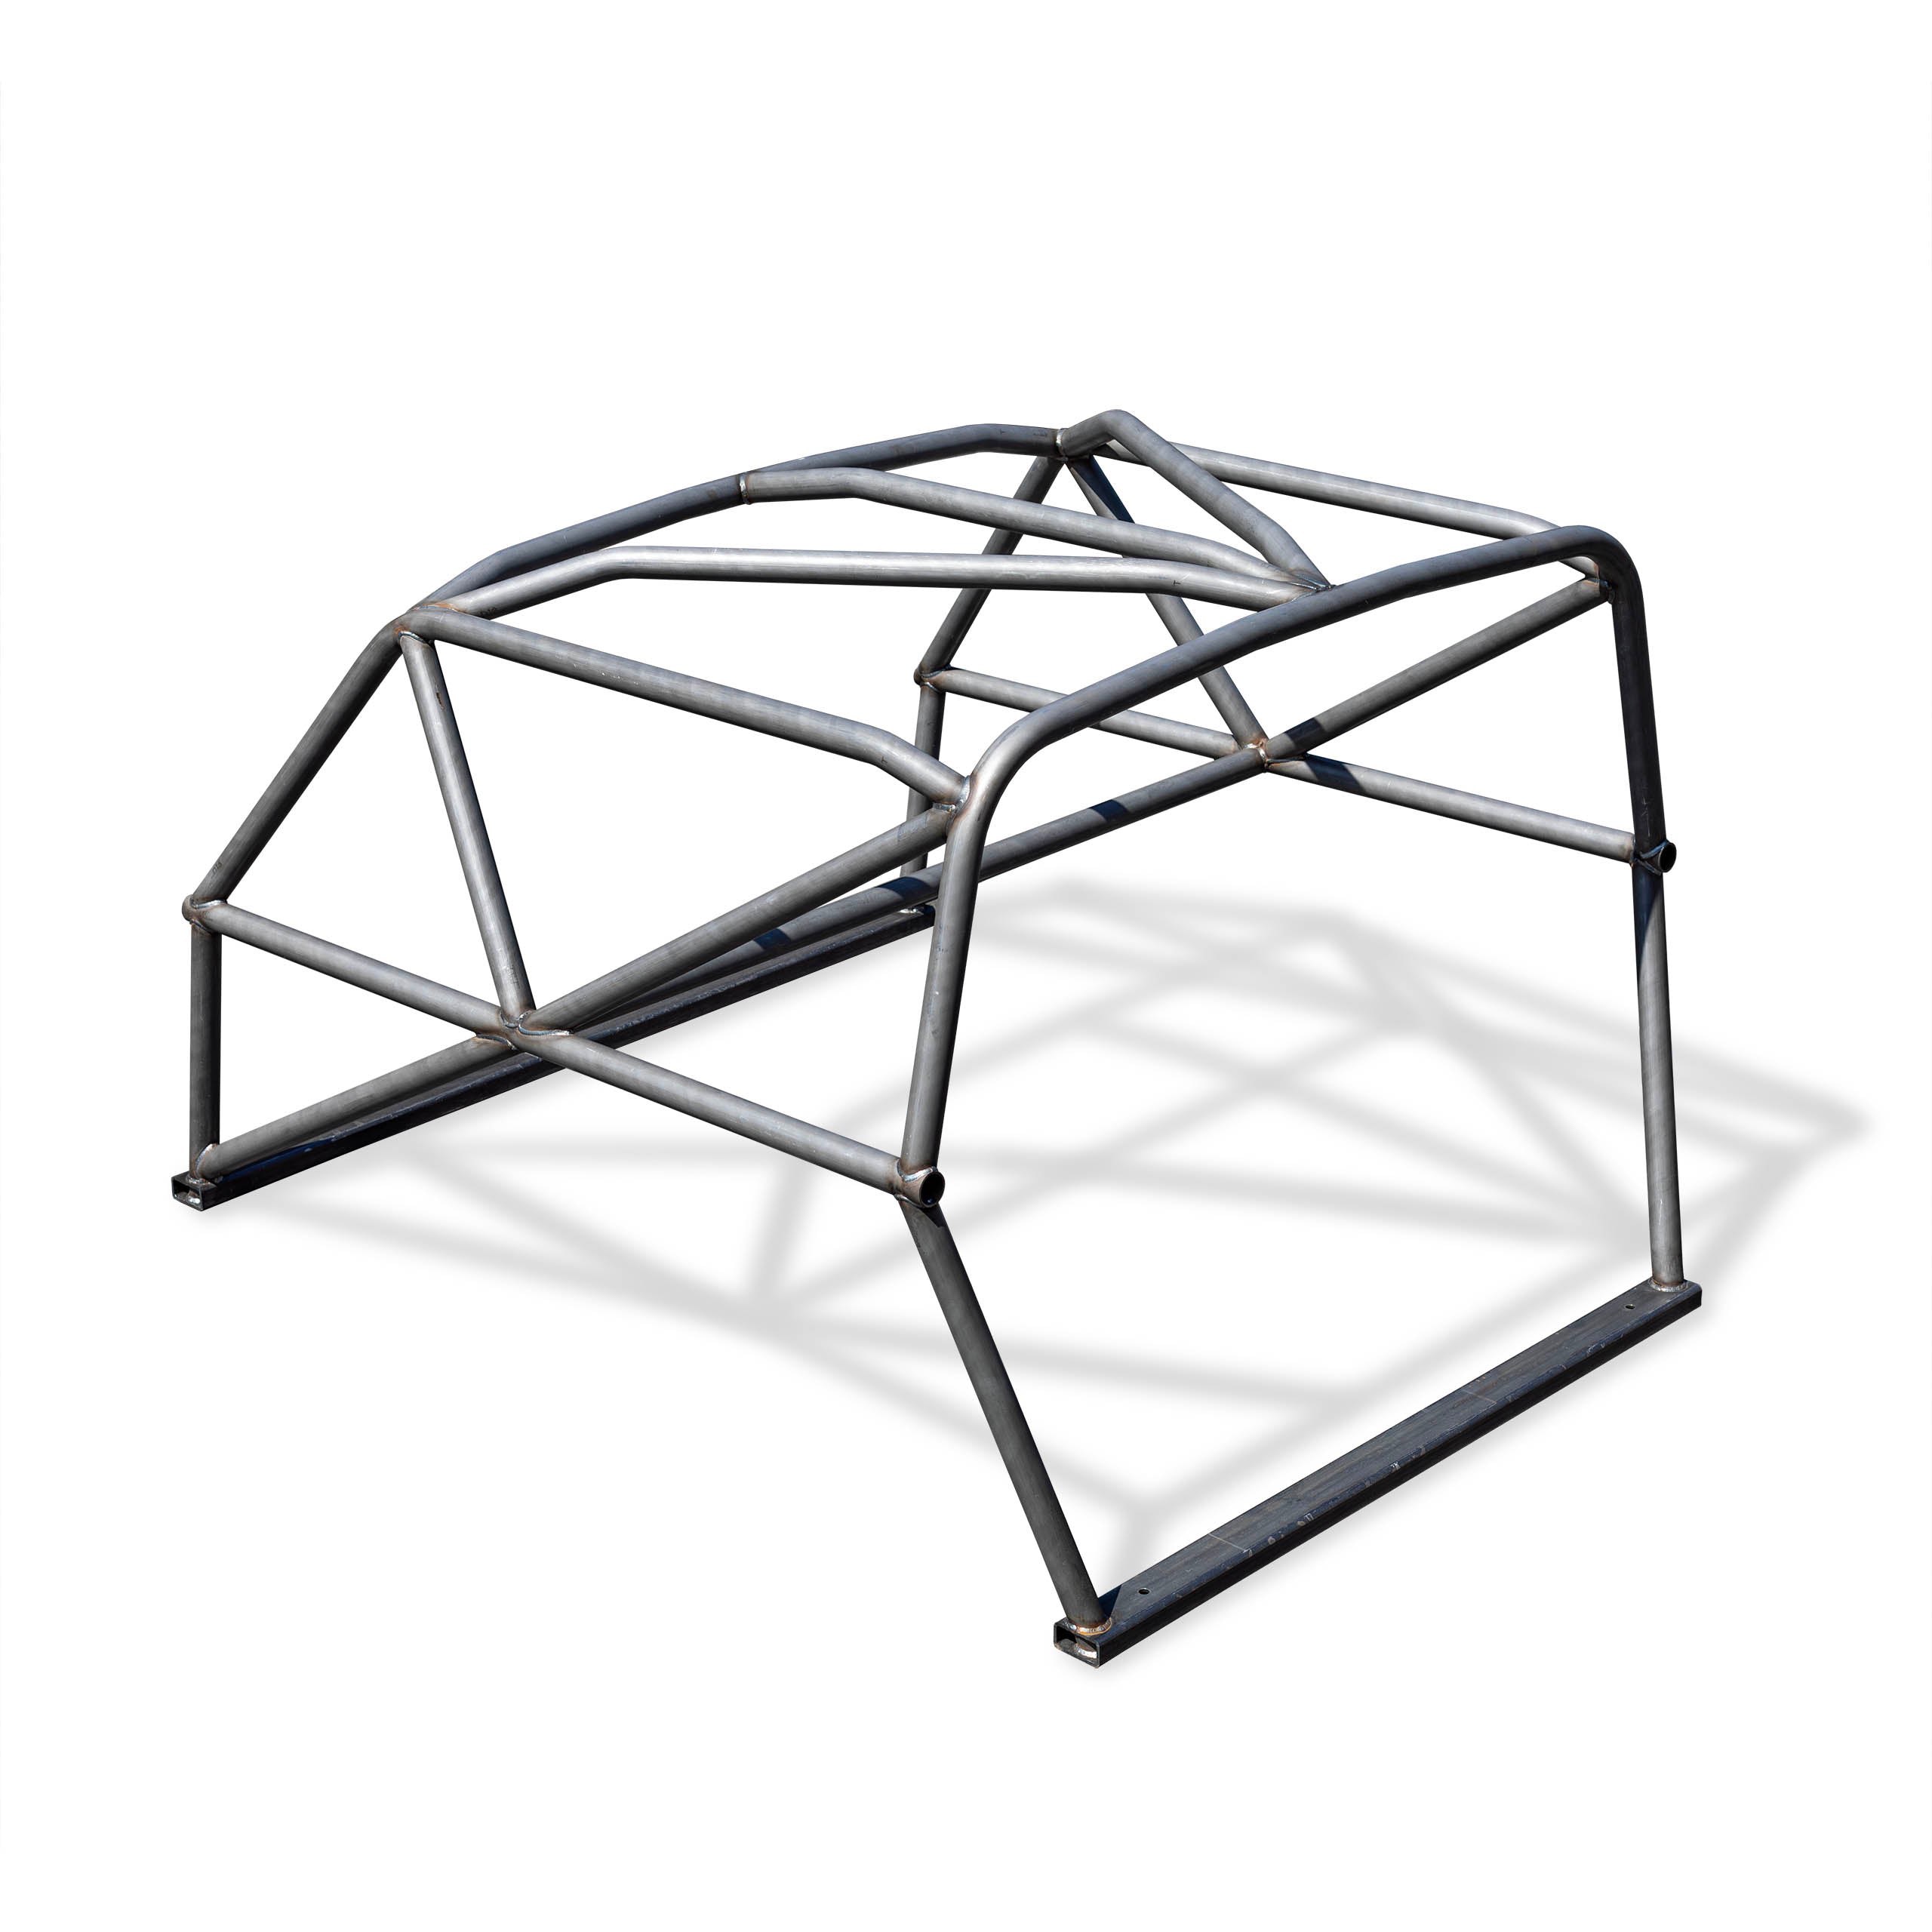 Desolate Motorsports Weld-It-Yourself Bronco 80-96 "Sport" Roll Cage Kit